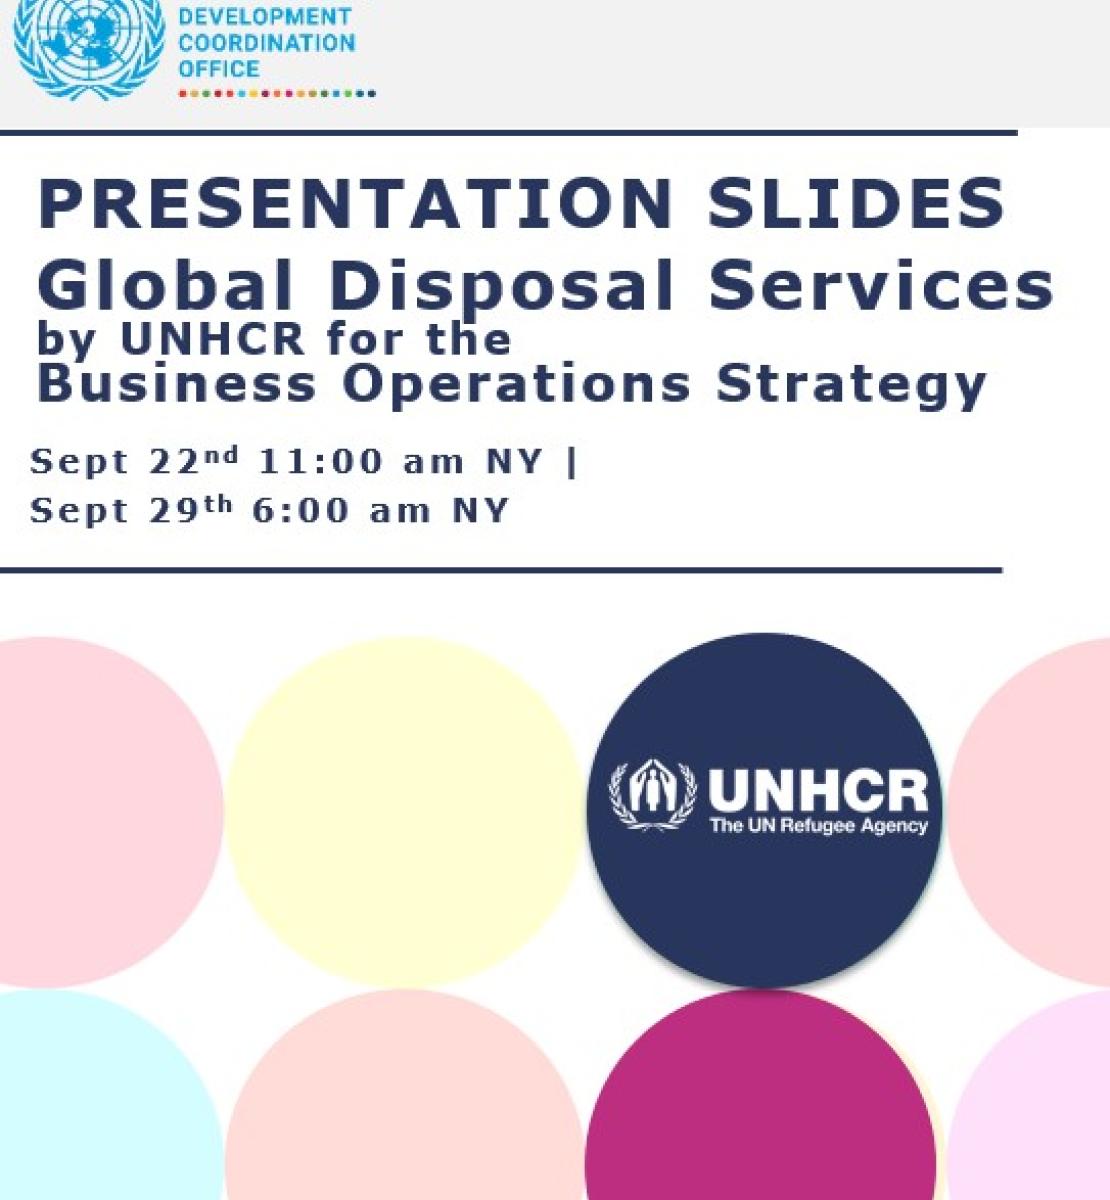 Cover with the title of the document and color circles and the UNSDG and UNHCR logo.